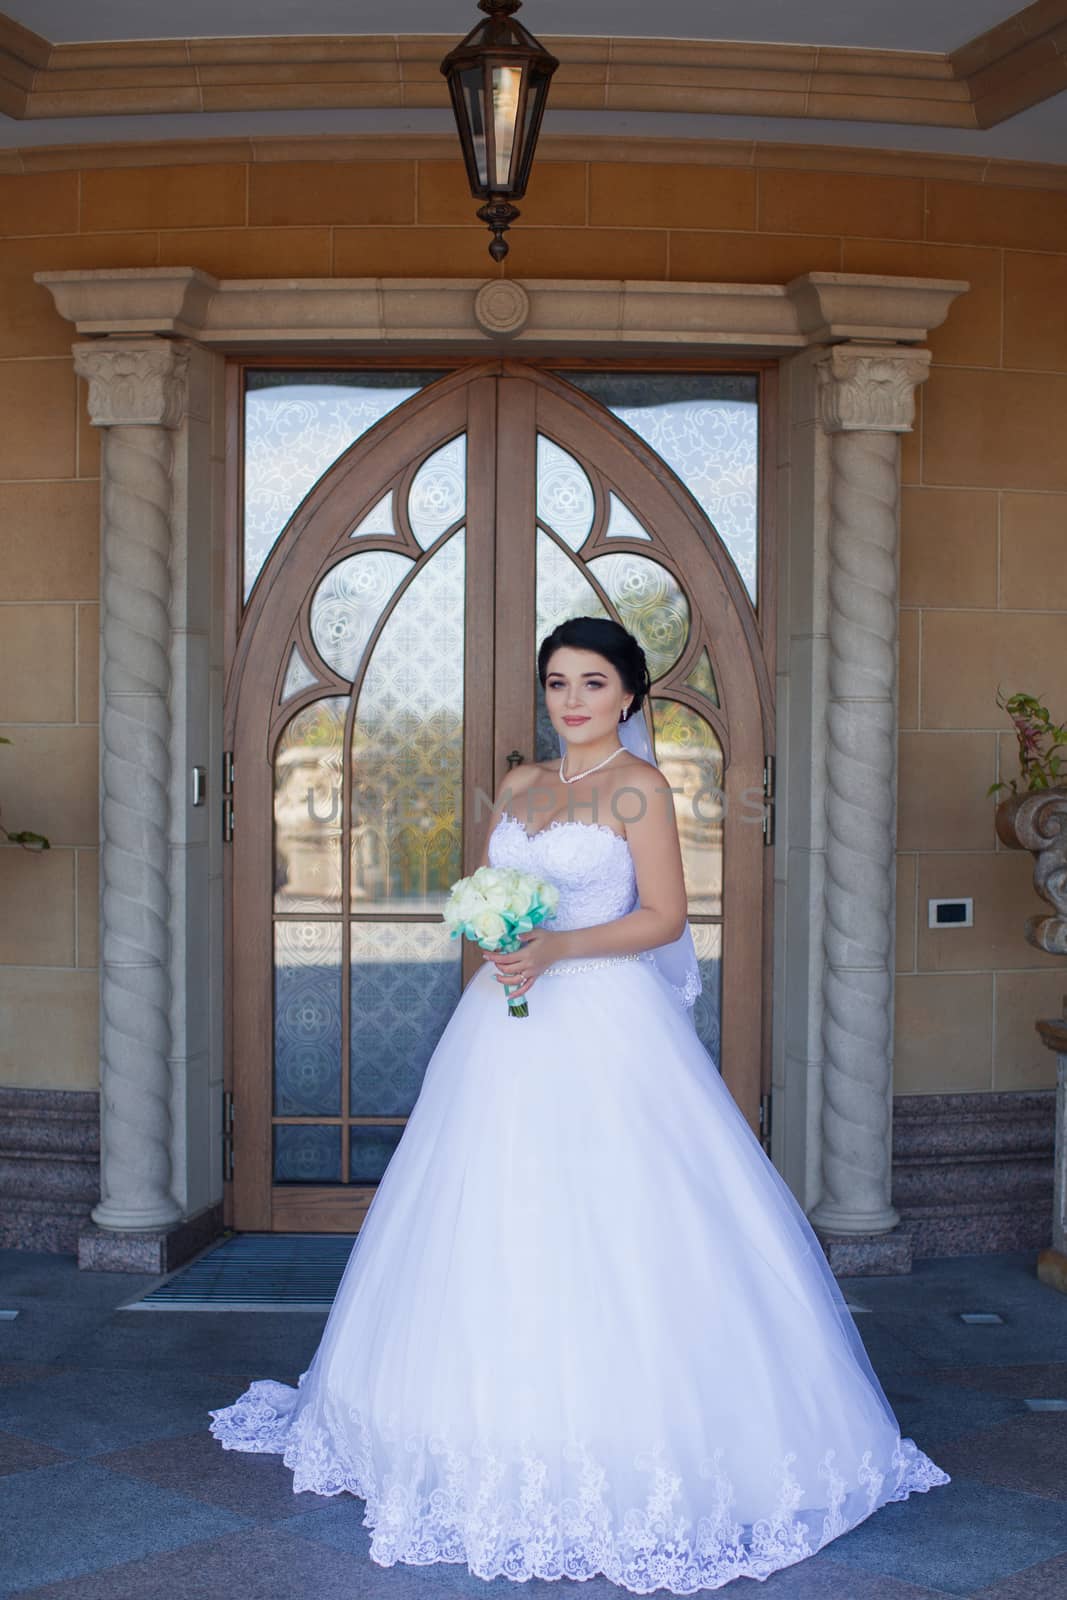 Bride with a bouquet on the background of the door by lanser314